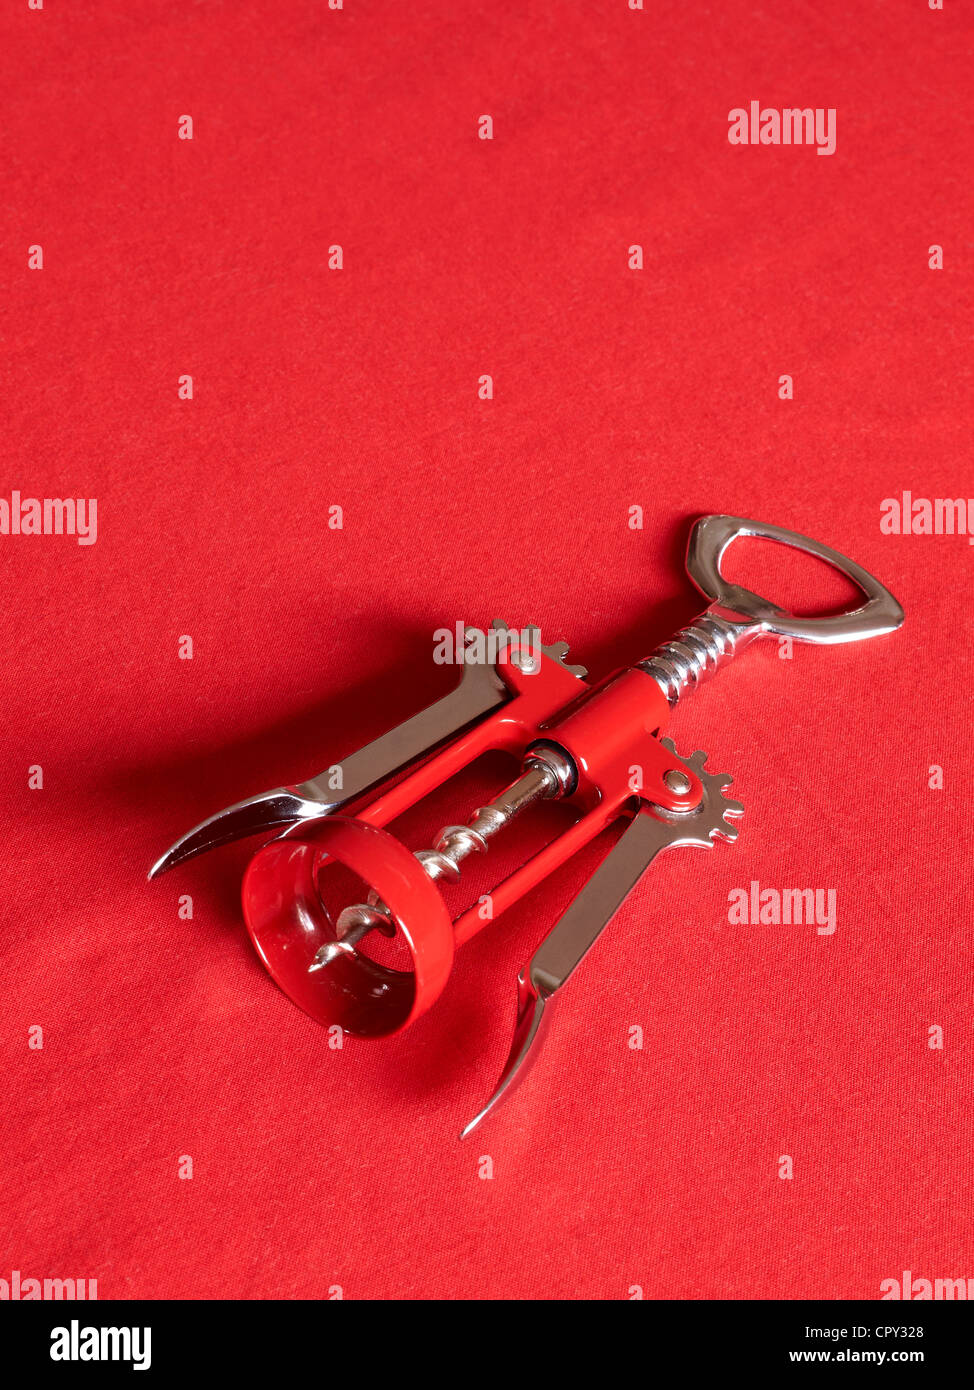 Close up of a corkscrew with bottle opener isolated on red background Stock Photo